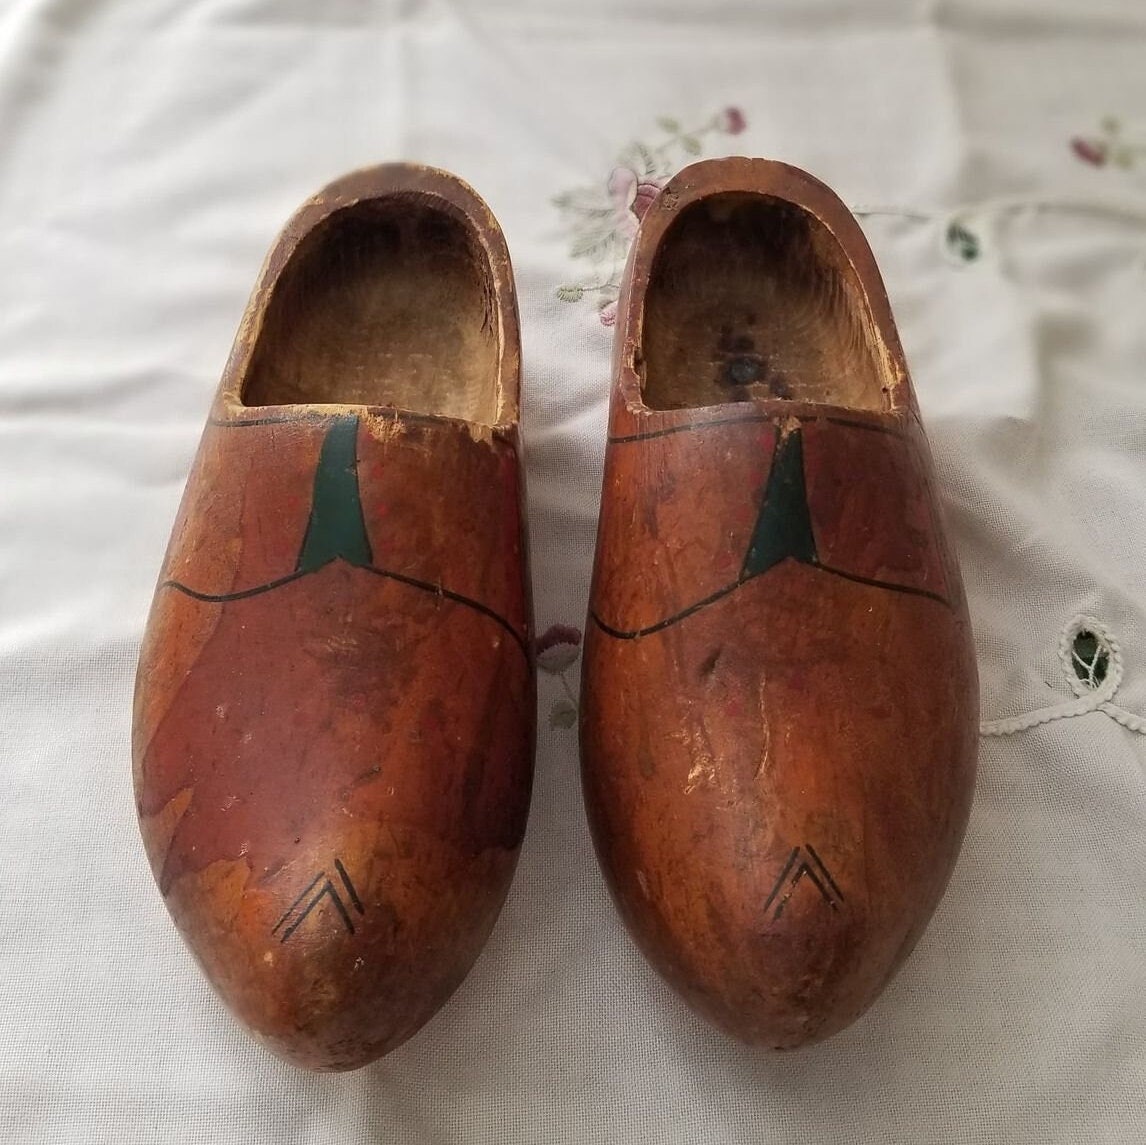 Vintage Holland Dutch and Painted Wooden Shoes Etsy